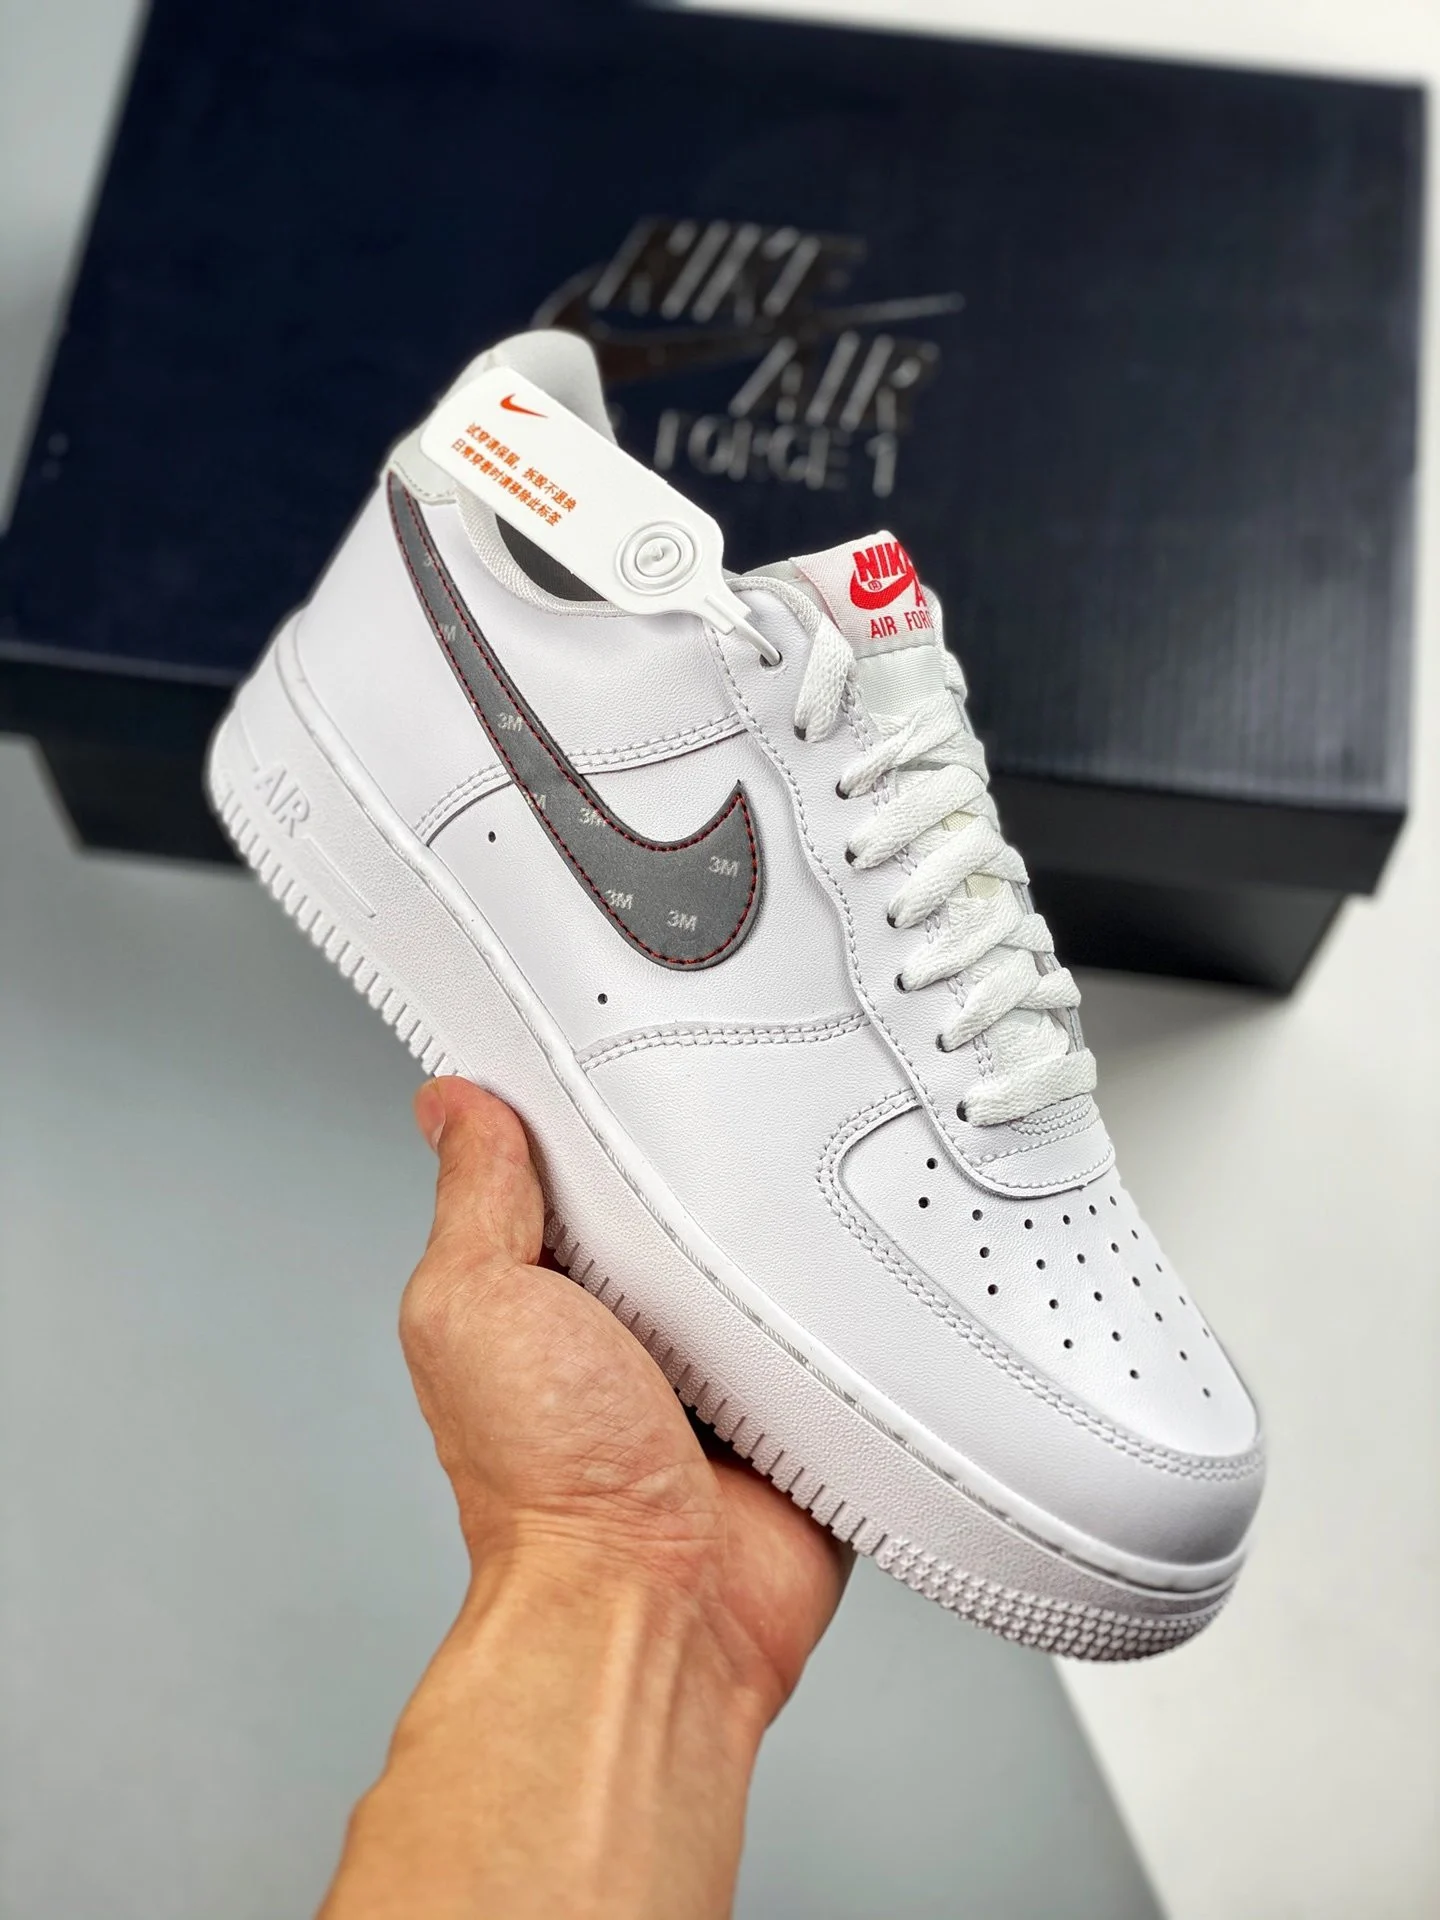 3M x Nike Air Force 1 White Reflective Logo CT2296-100 For Sale